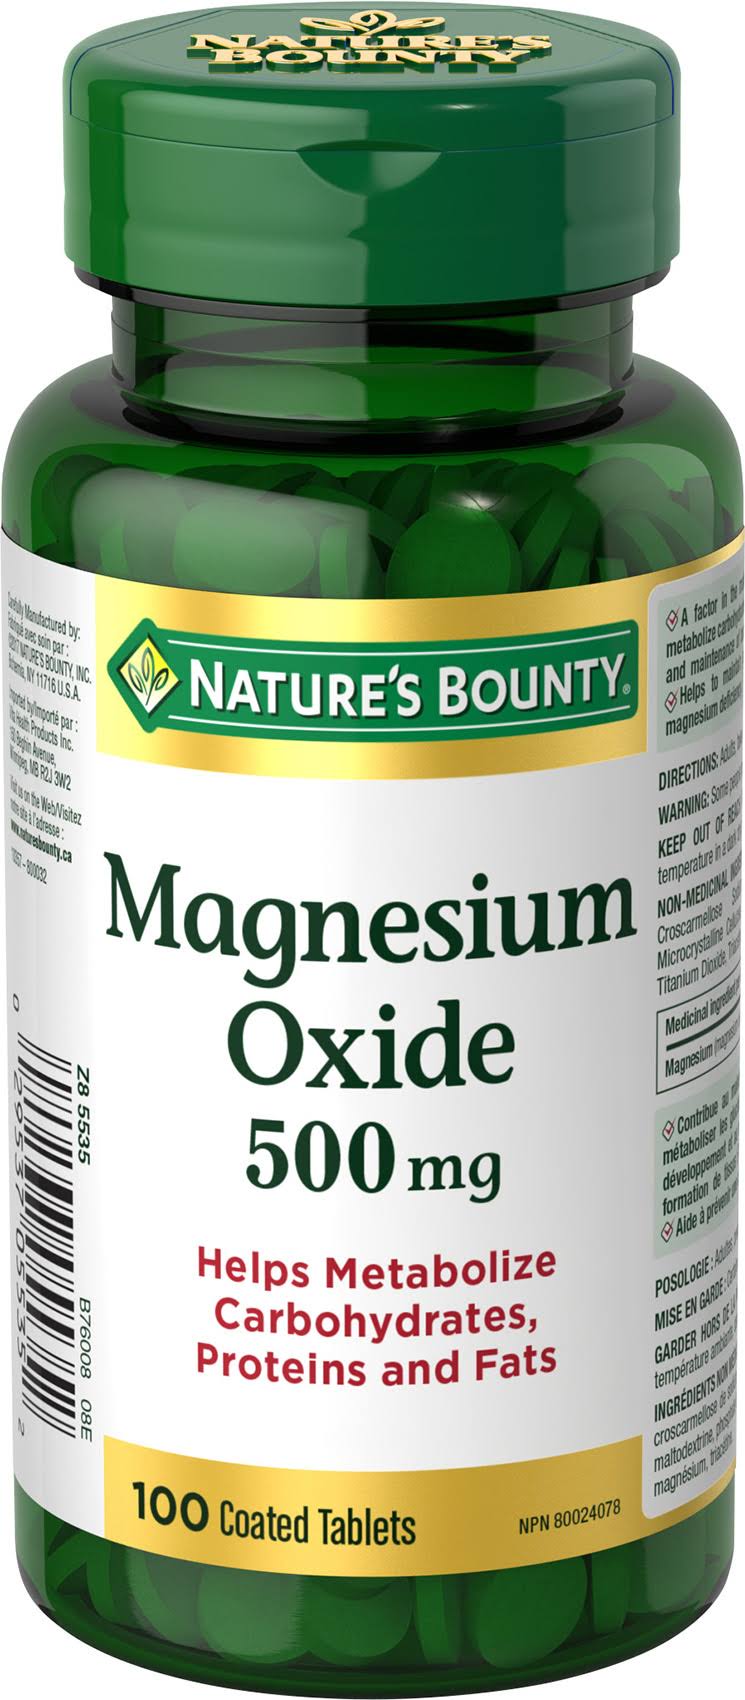 Nature's Bounty Magnesium Oxide - 500mg, 100ct